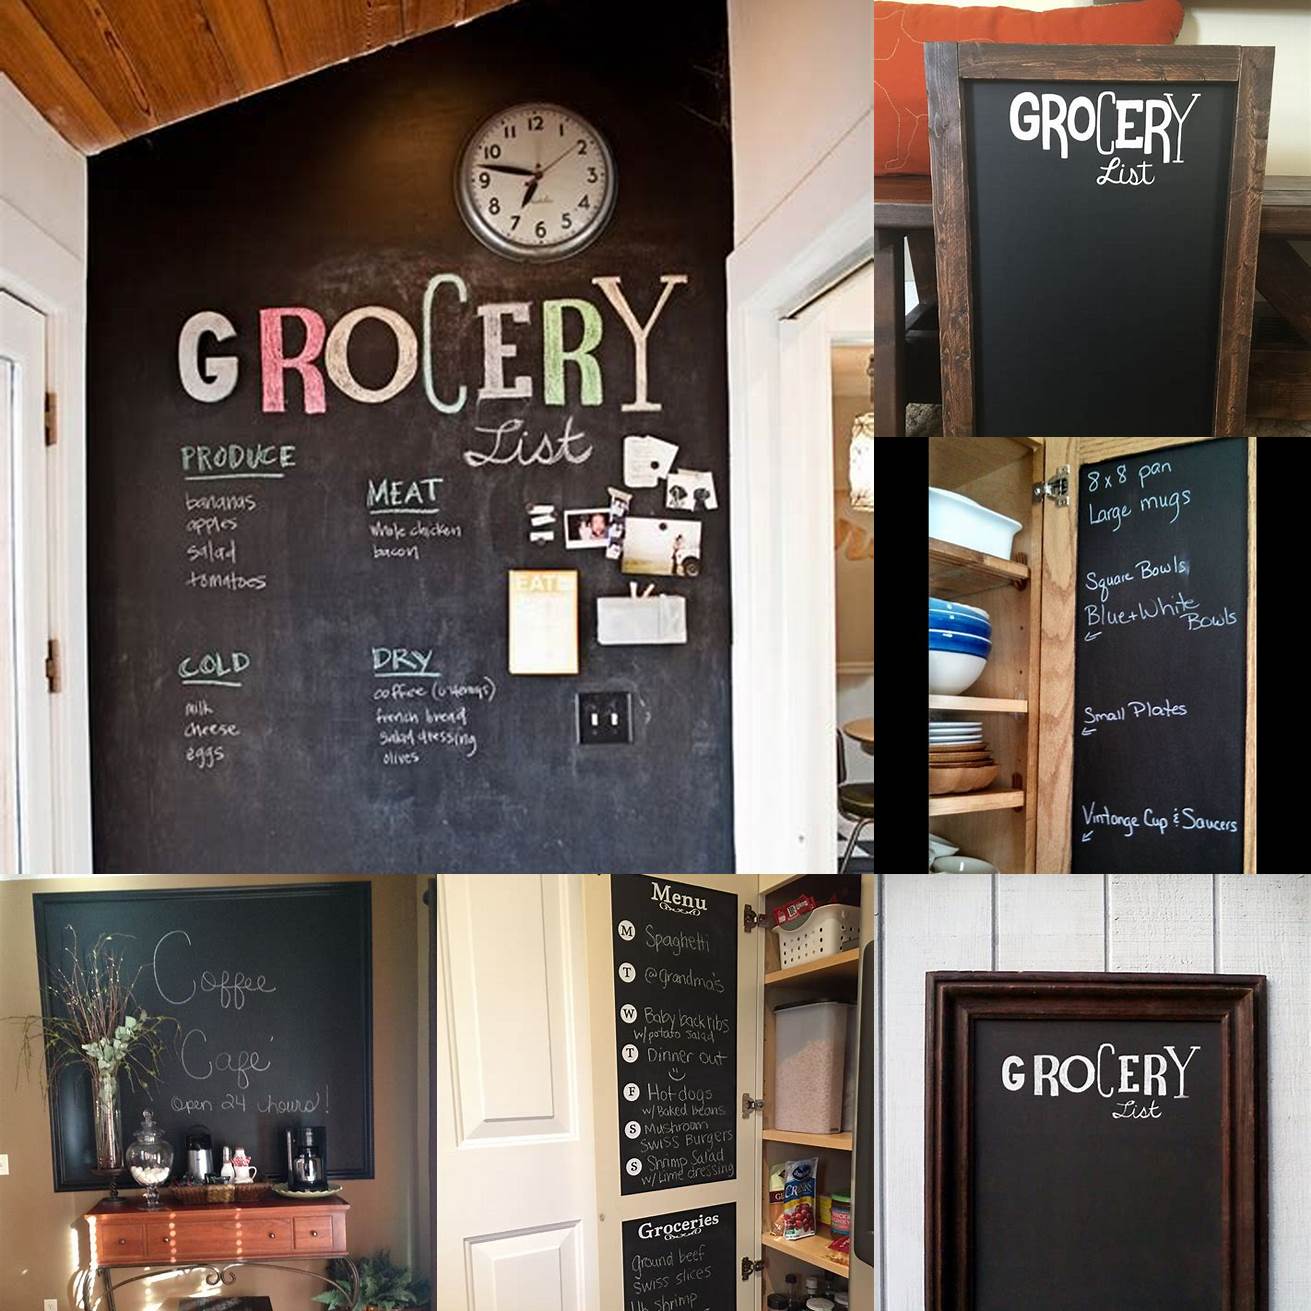 Write down your grocery list on the kitchen chalkboard As you run out of items during the week you can add them to the list on the board This makes it easy to see what needs to be purchased during your next grocery run